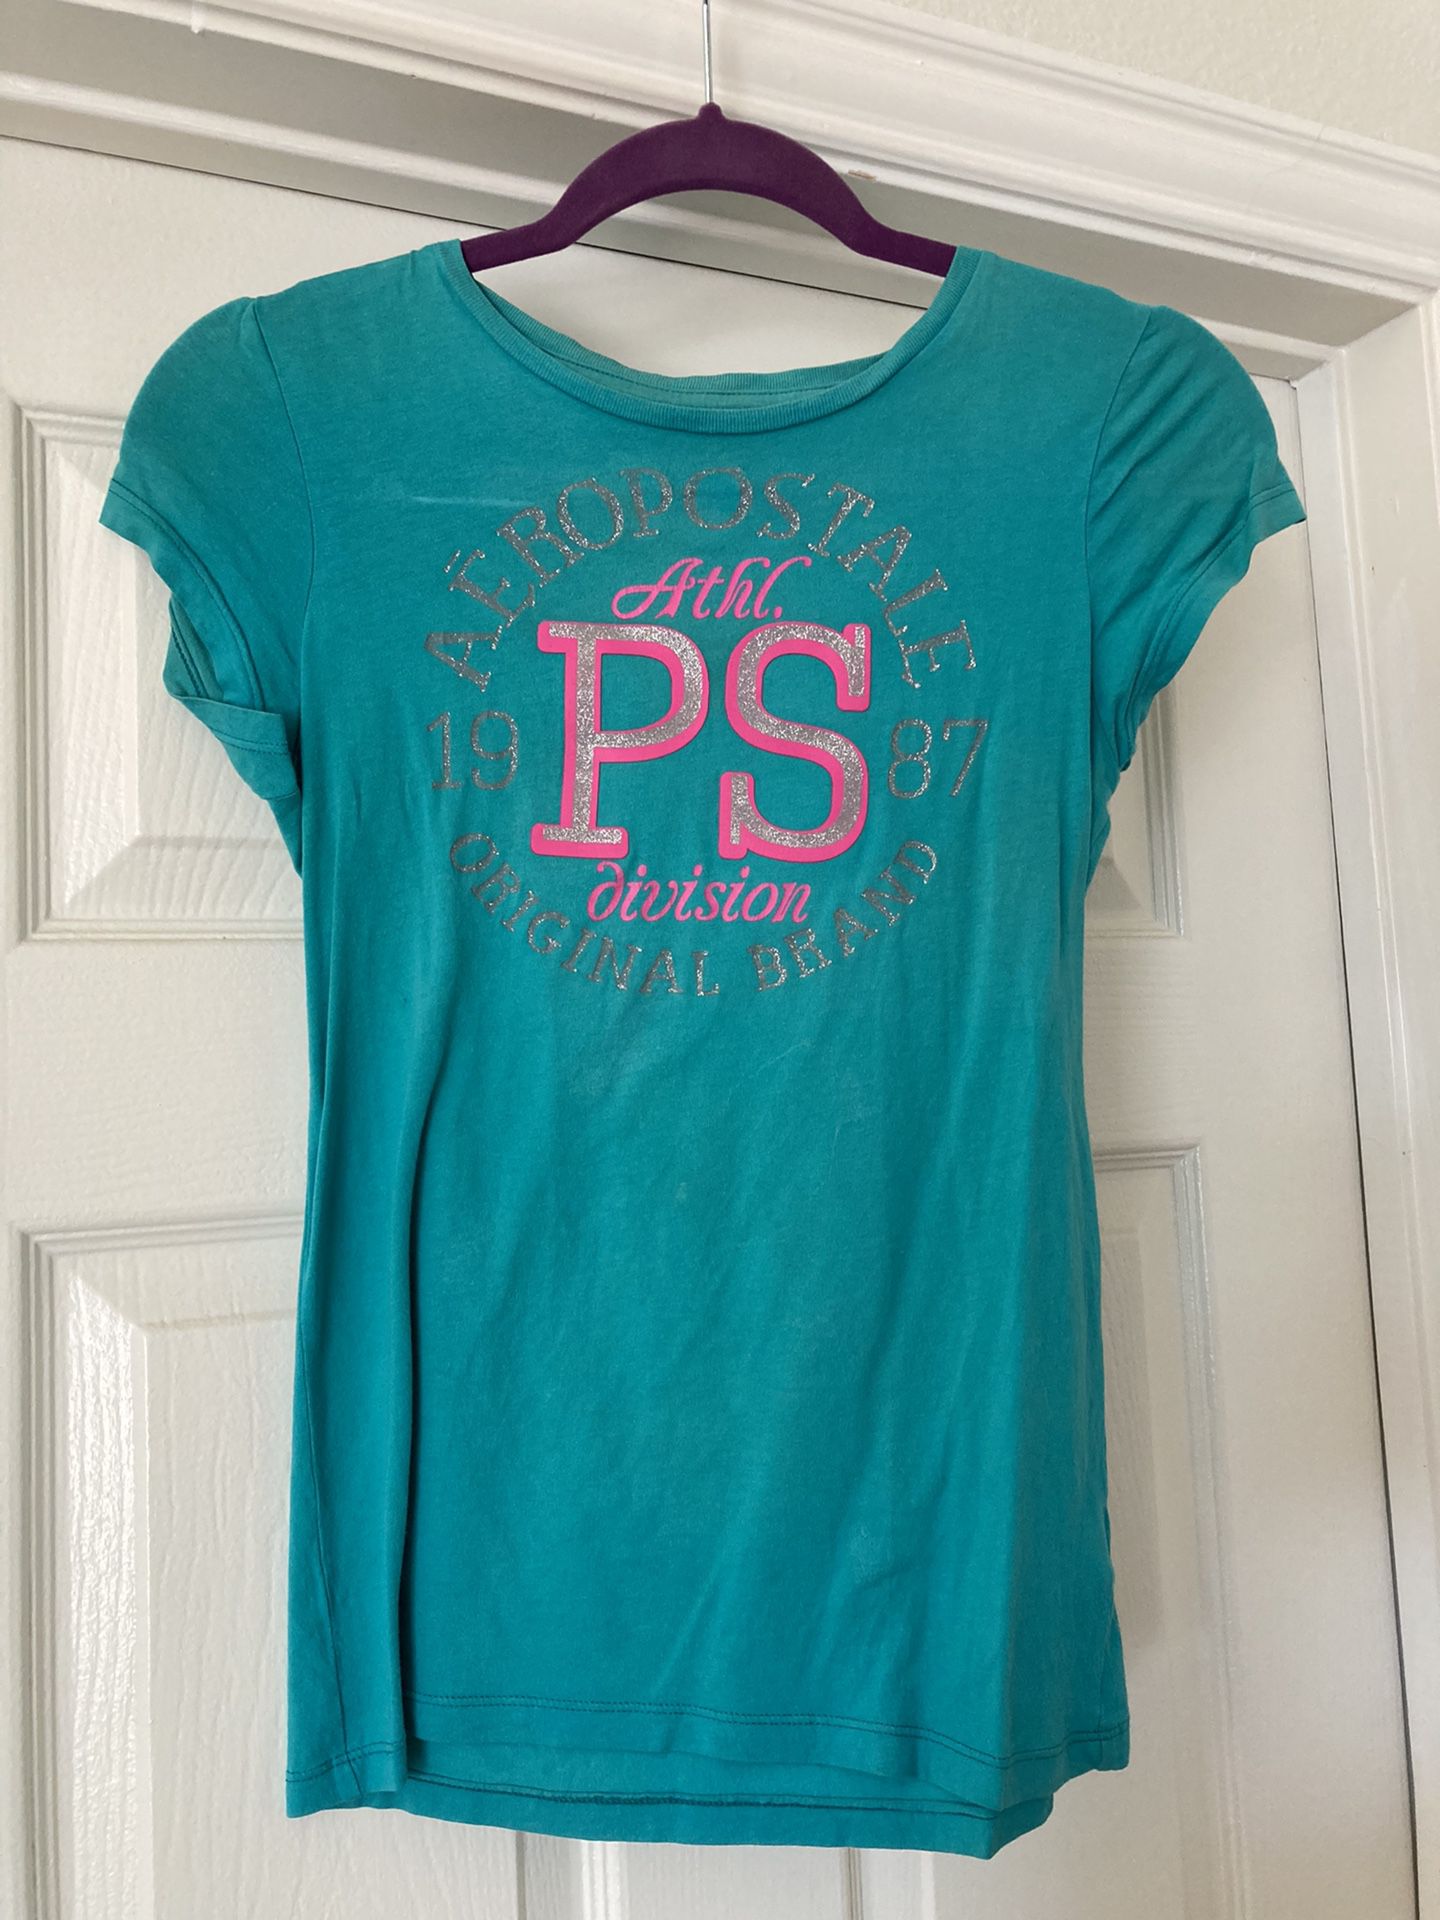 Aeropostale T-shirt Turquoise With Pink And Silver Letters